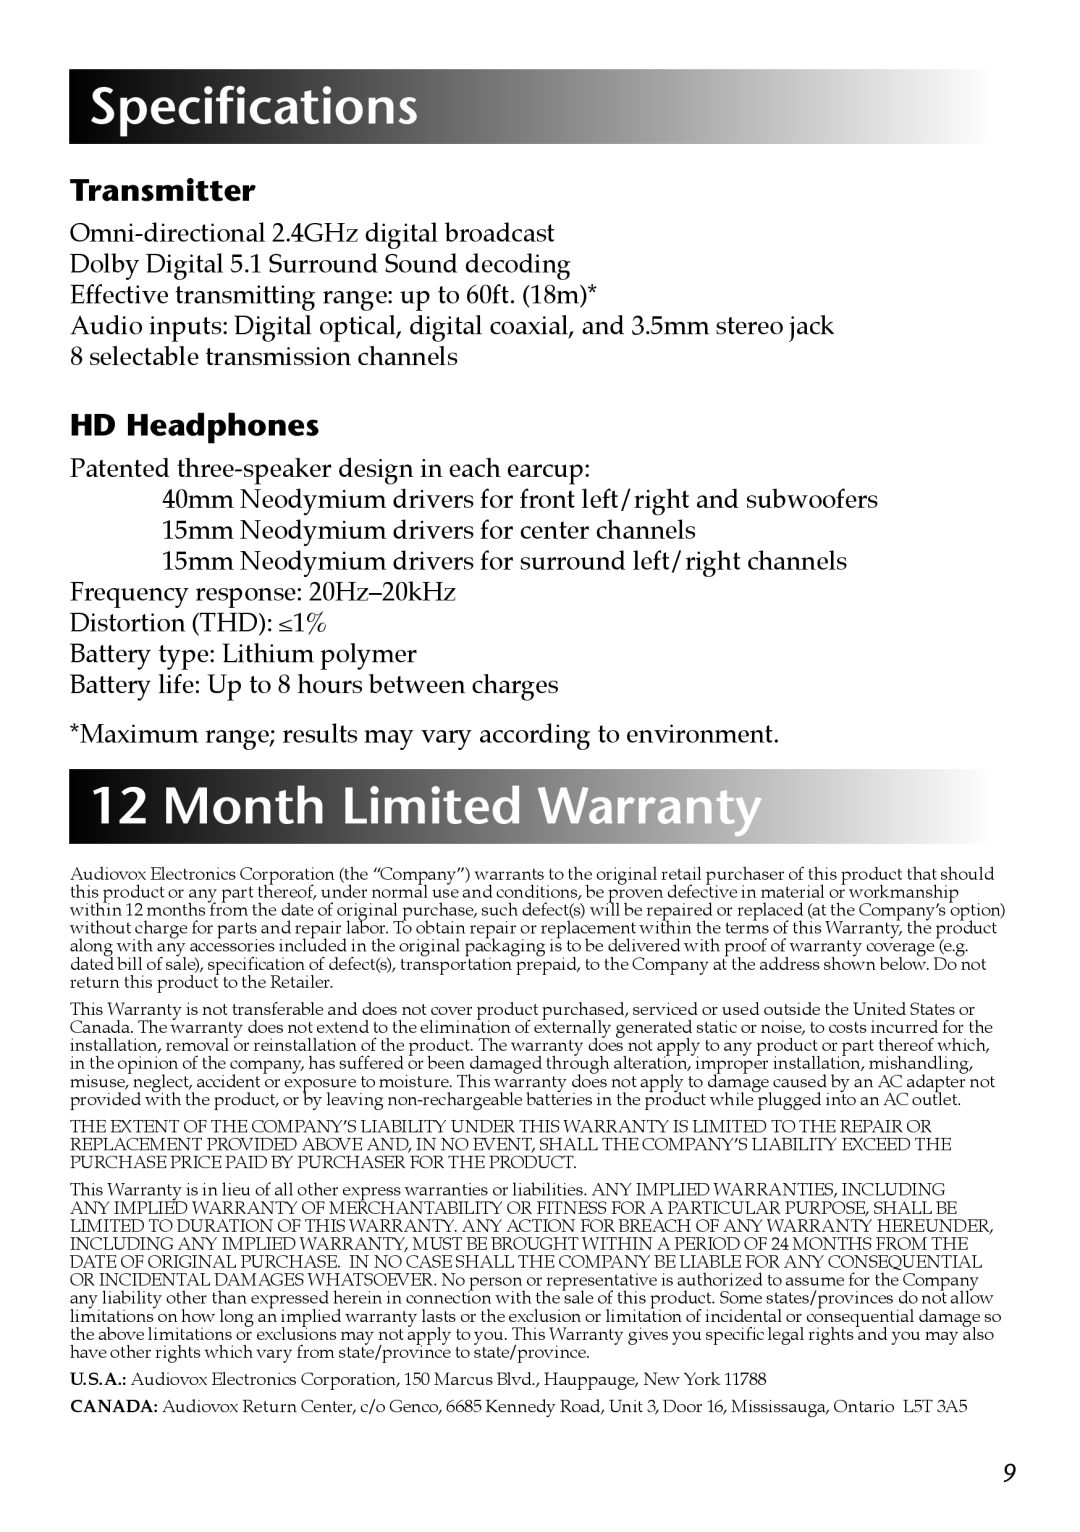 Acoustic Research AW-D510 owner manual Specifications, Month Limited Warranty, Transmitter, HD Headphones 